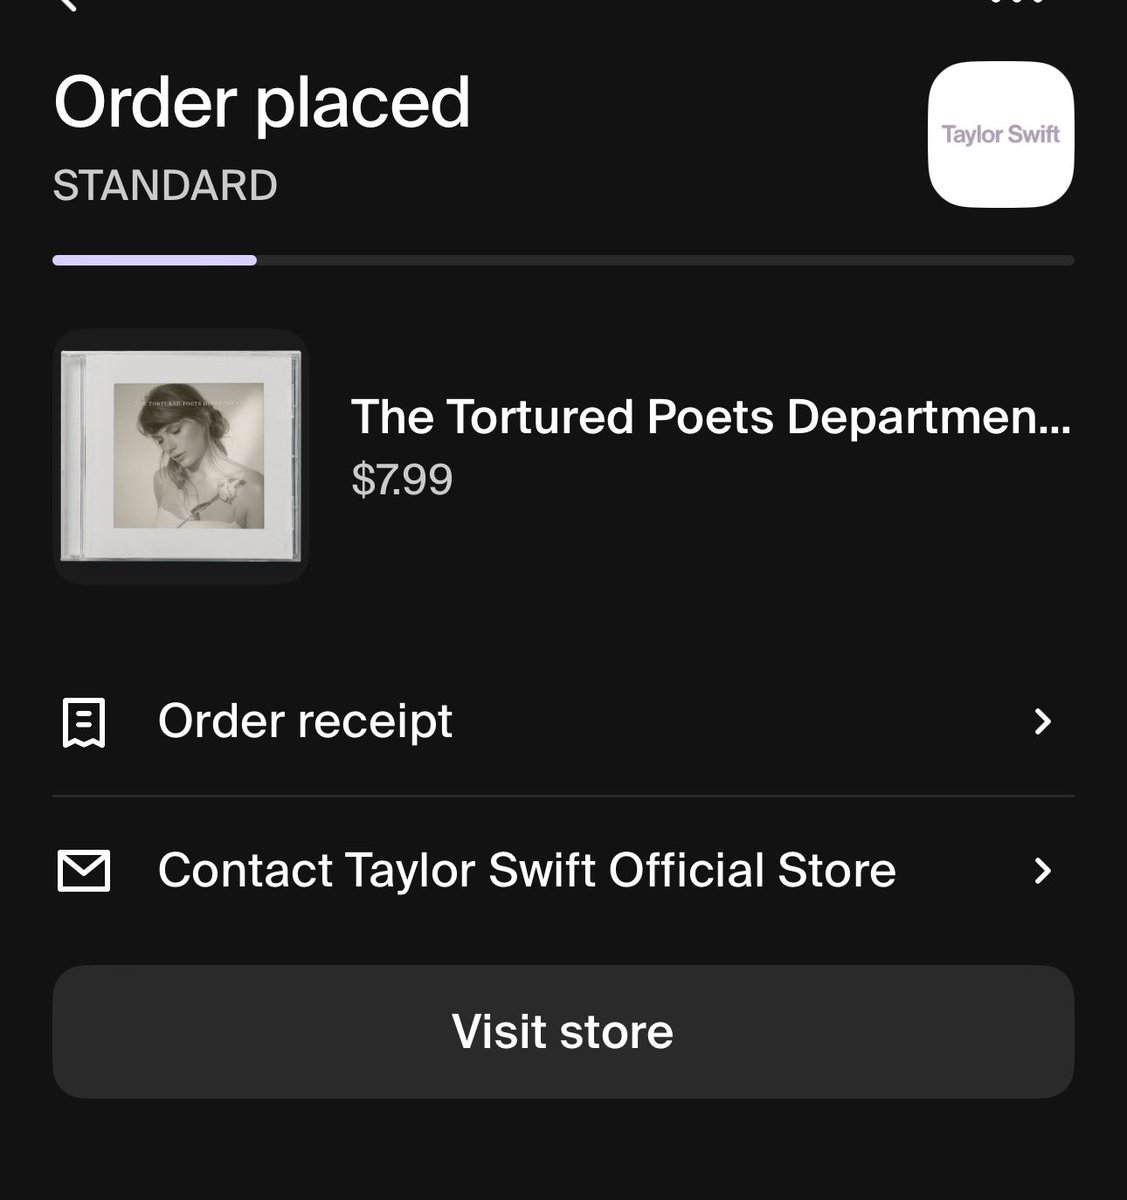 @taylornation13 @taylorswift13 IM GONNA BE CRYING AT THE GYM TO THIS 🤩🤩🤩🤩 #TSTTPD